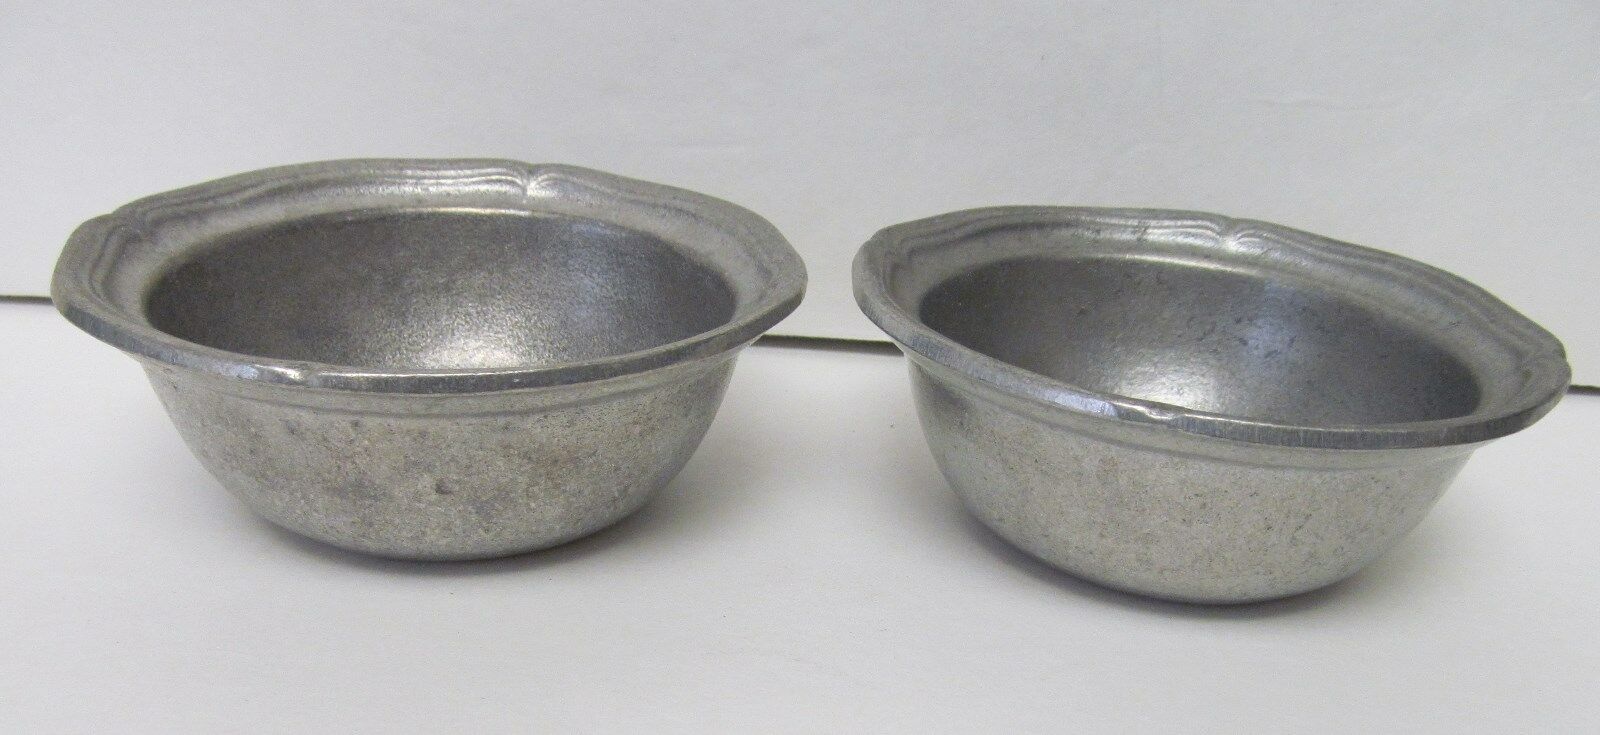 Primary image for Wilton Heavyweight Pewter 4 3/4" Custard Bowls Cups Condiment Set of 2 RVP VTG